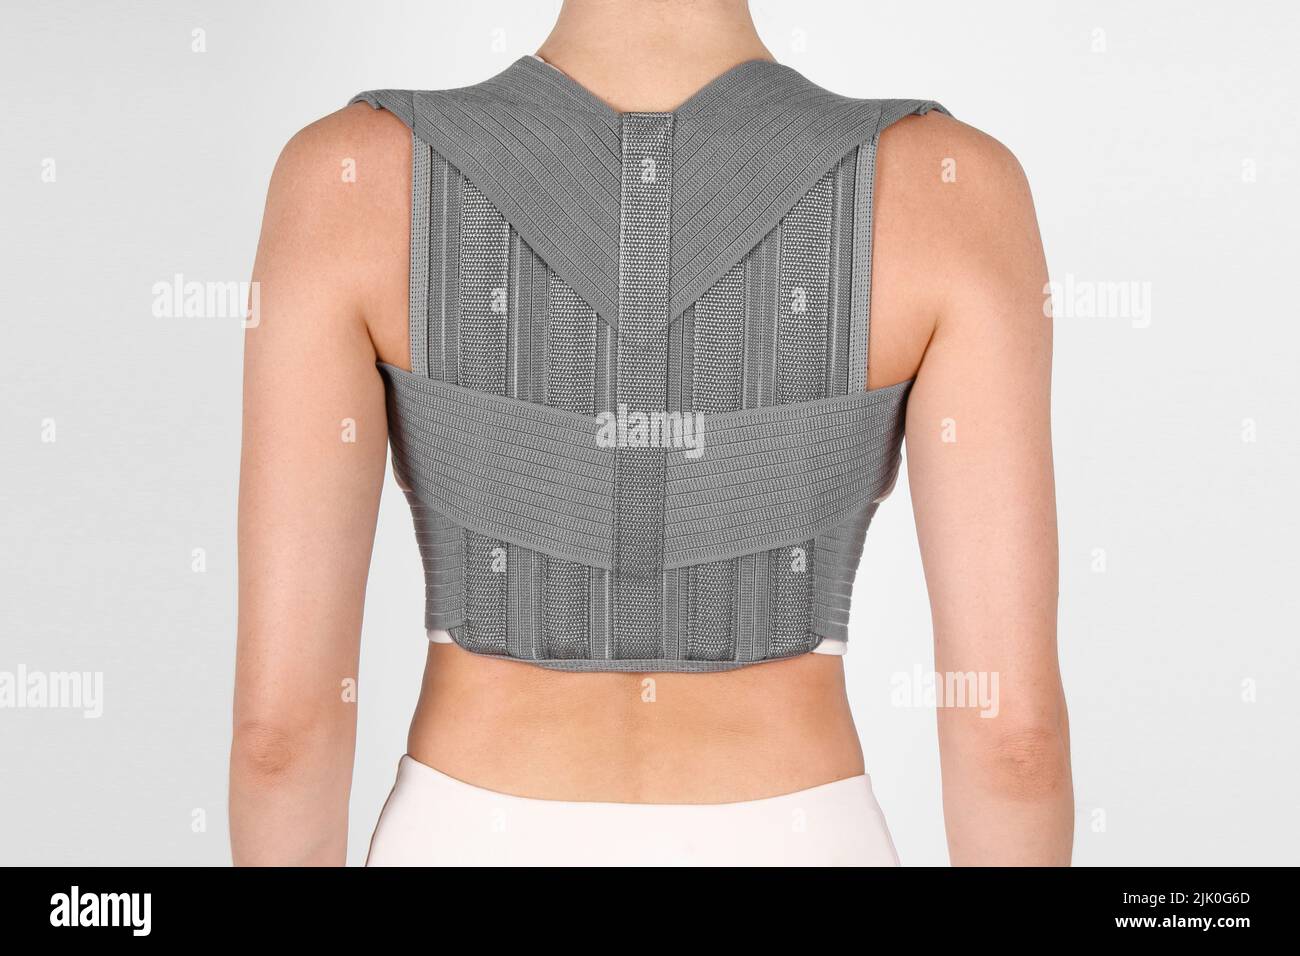 Posture Corrector isolated on white. Orthopedic lumbar support products. Lumbar Support Belts For Back Clavicle Spine. Lumbar Waist Support Belt Stock Photo